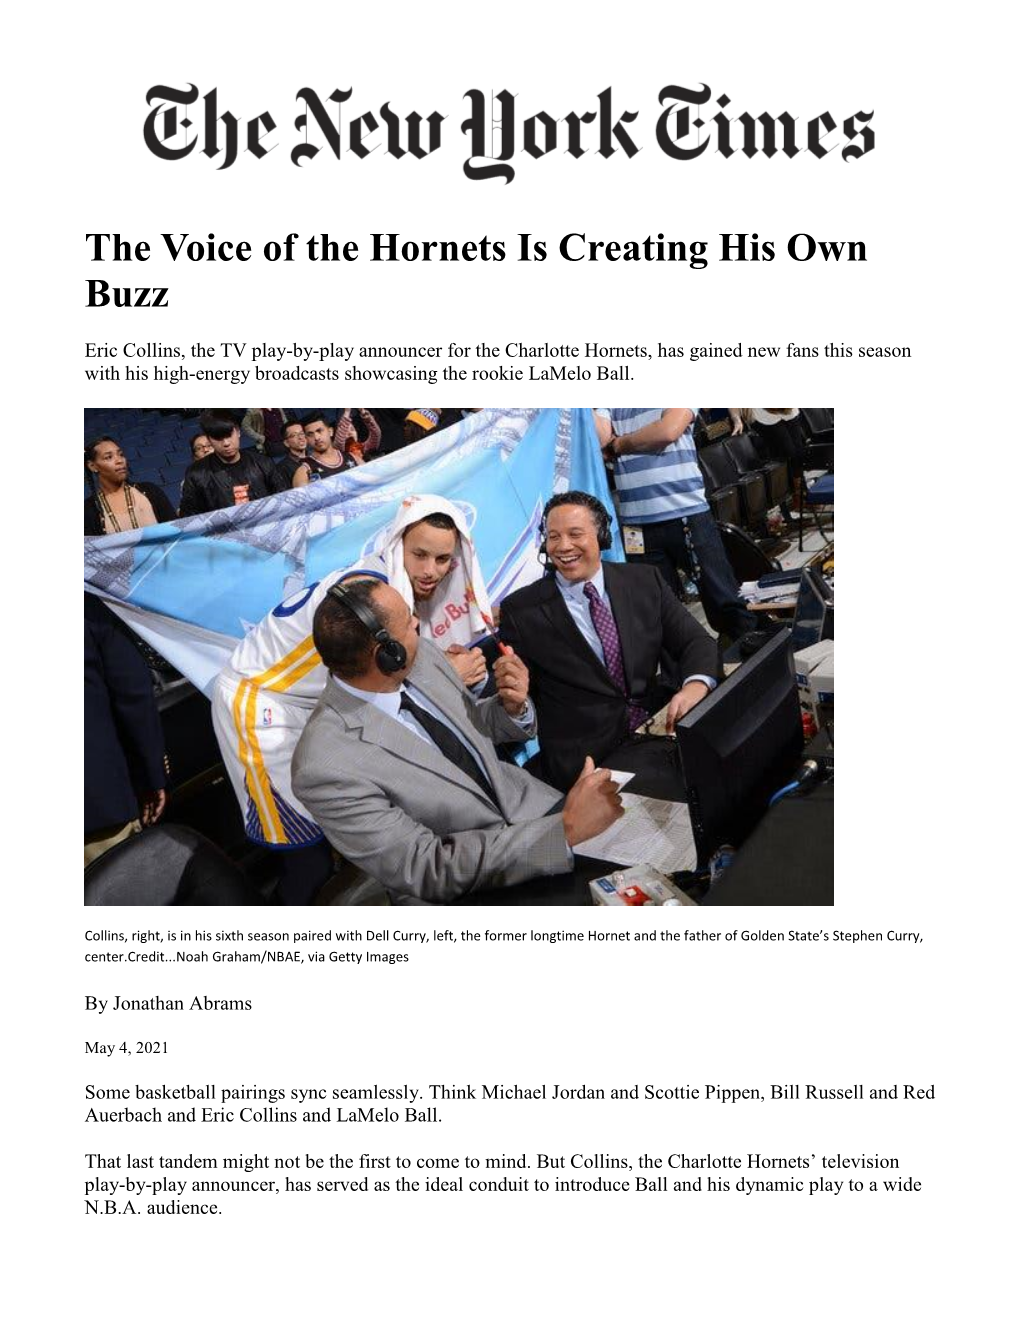 The Voice of the Hornets Is Creating His Own Buzz